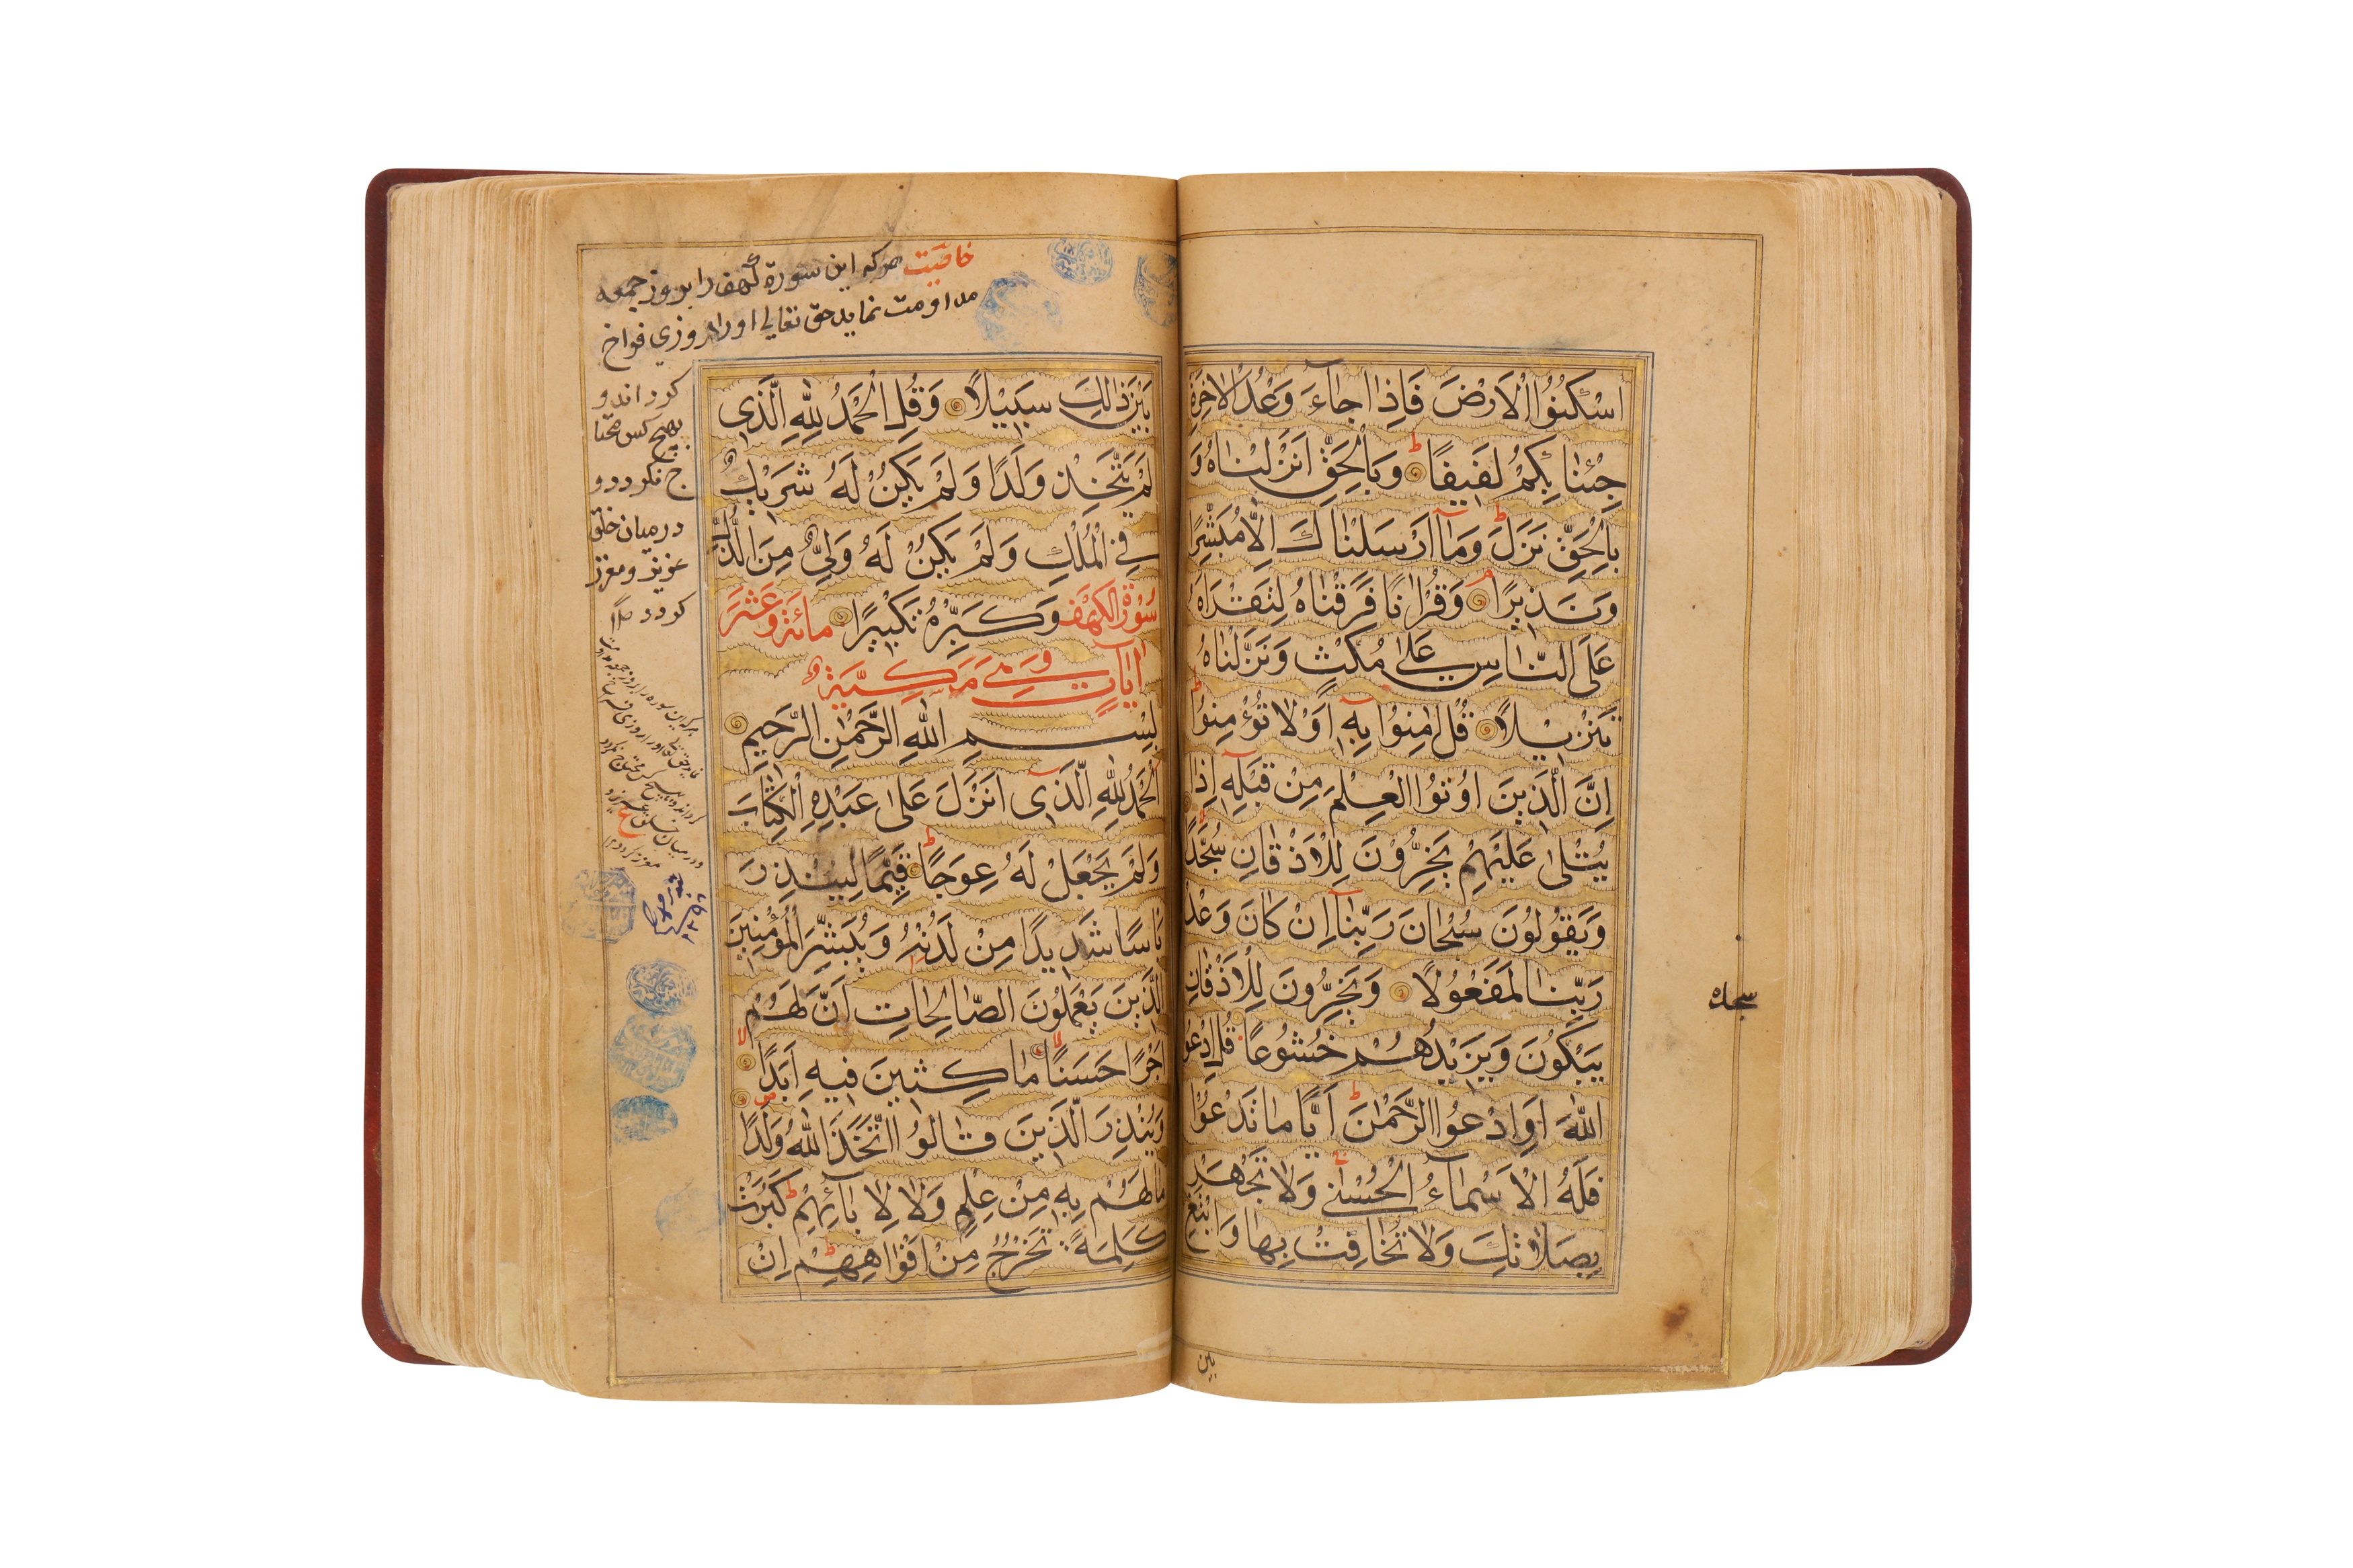 AN ILLUMINATED QUR'AN, INDIA, POSSIBLY 18TH CENTURY Kashmir, North India, probably late 18th centur - Image 7 of 8